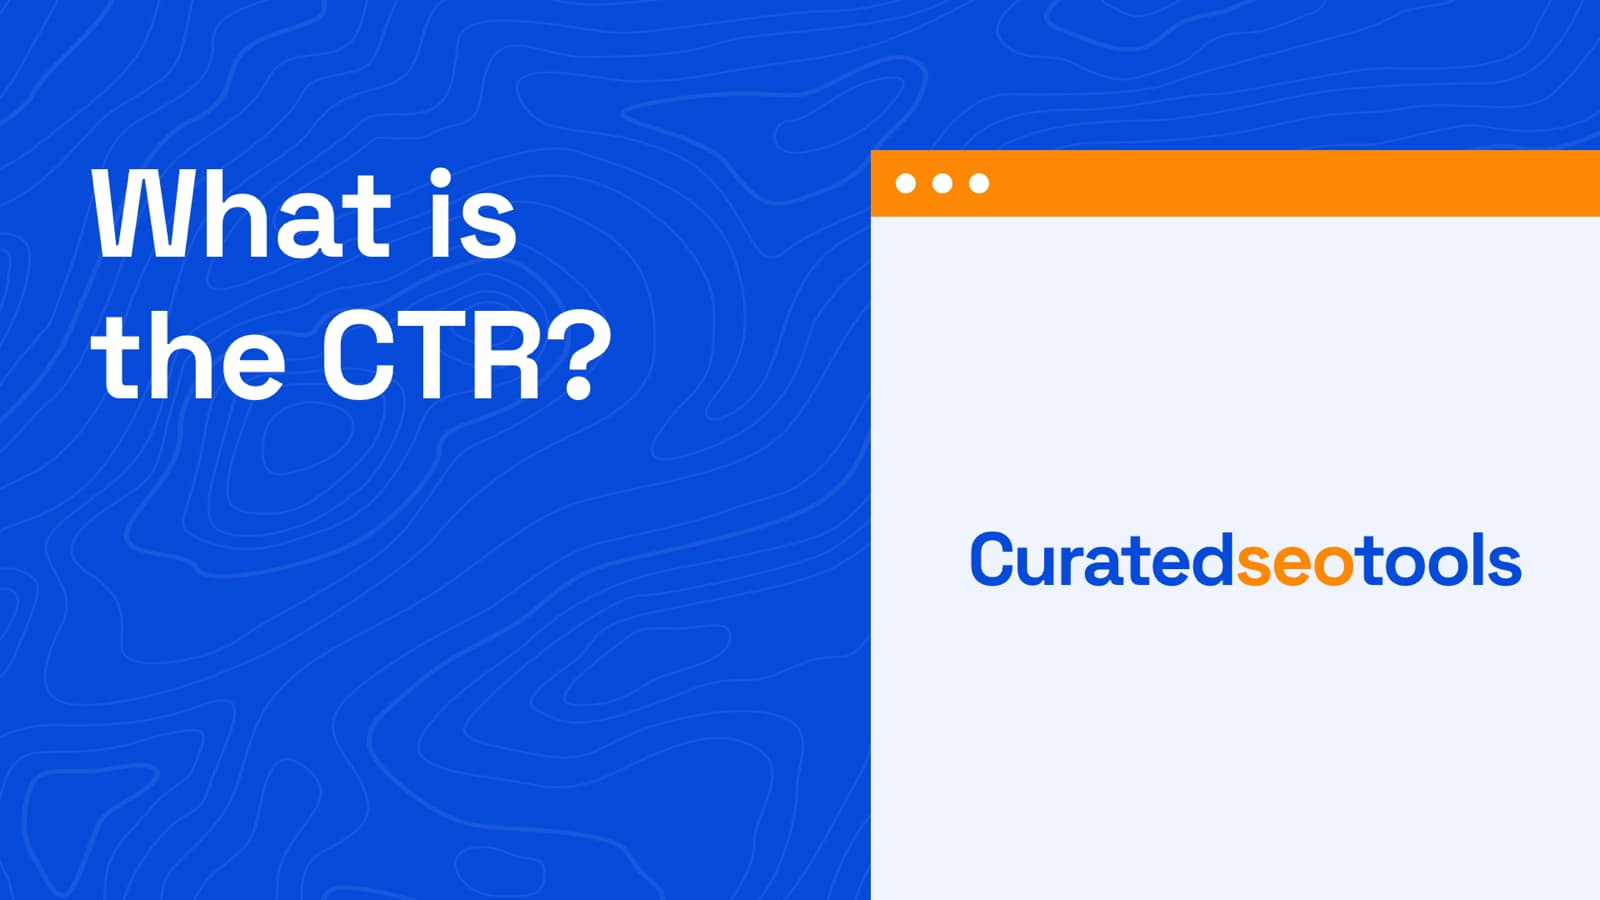 The cover image about the content title which is "What is the CTR?" and a browser shaped graphic element